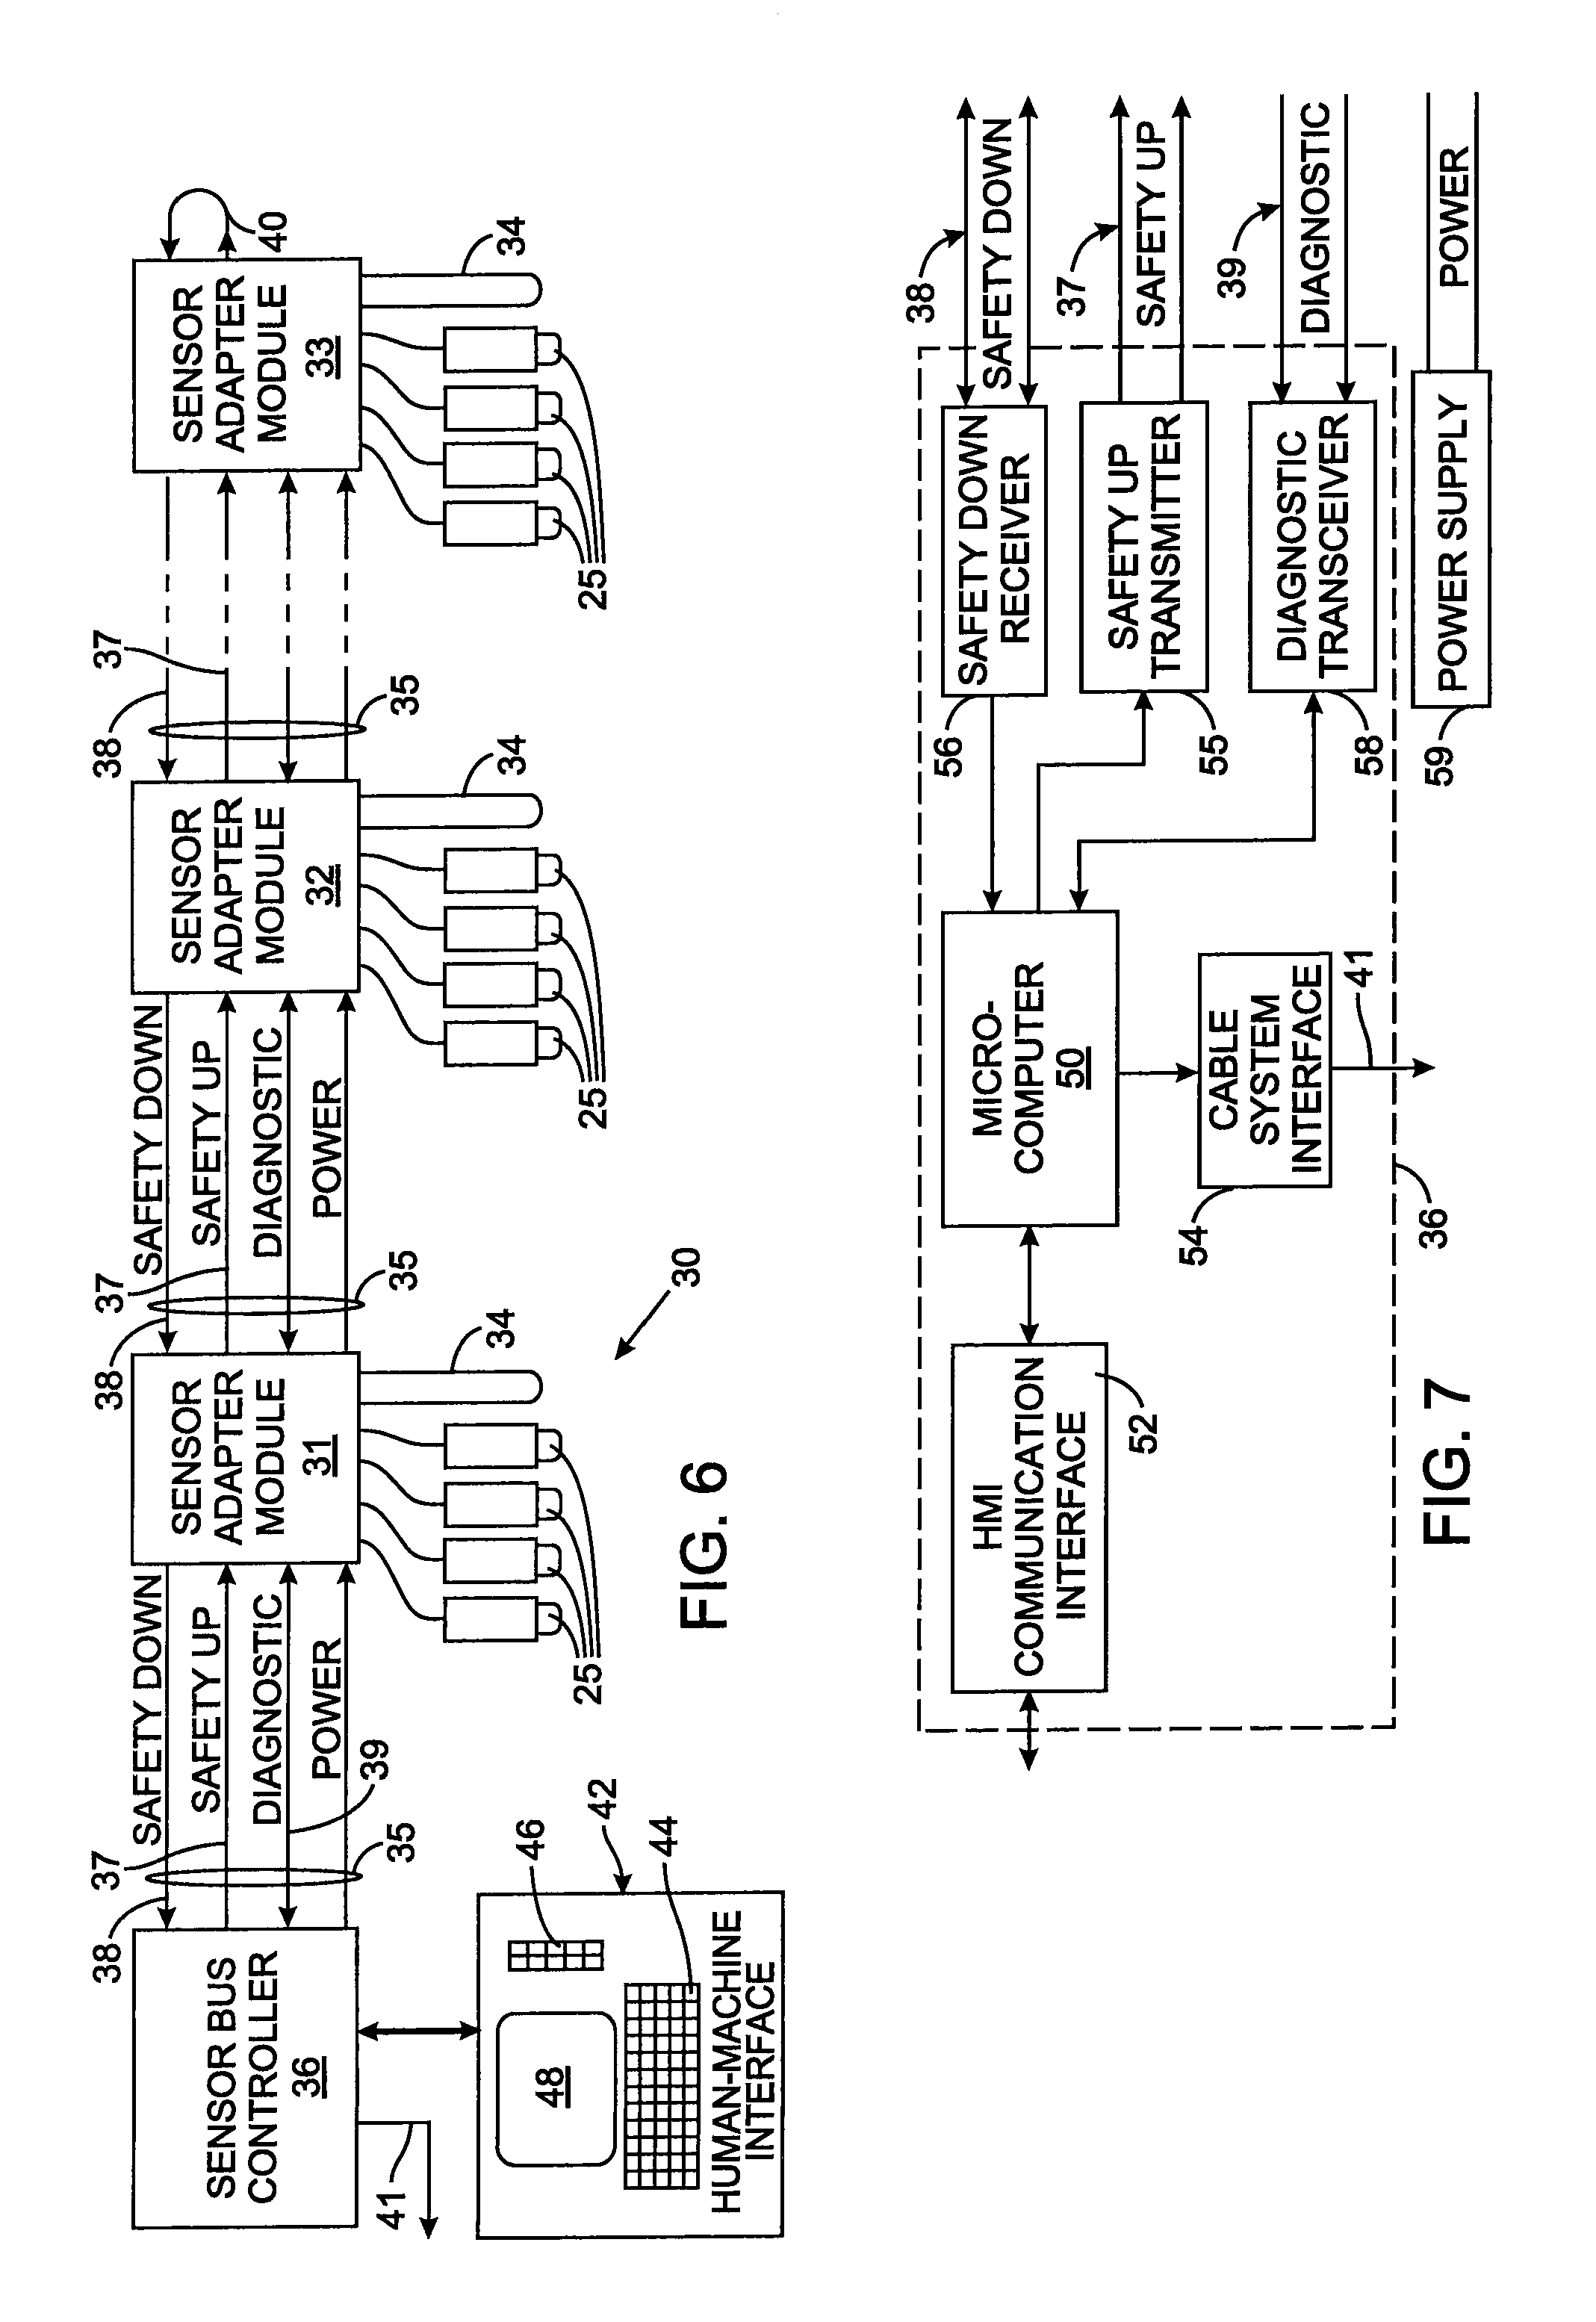 System for monitoring a plurality of sensors